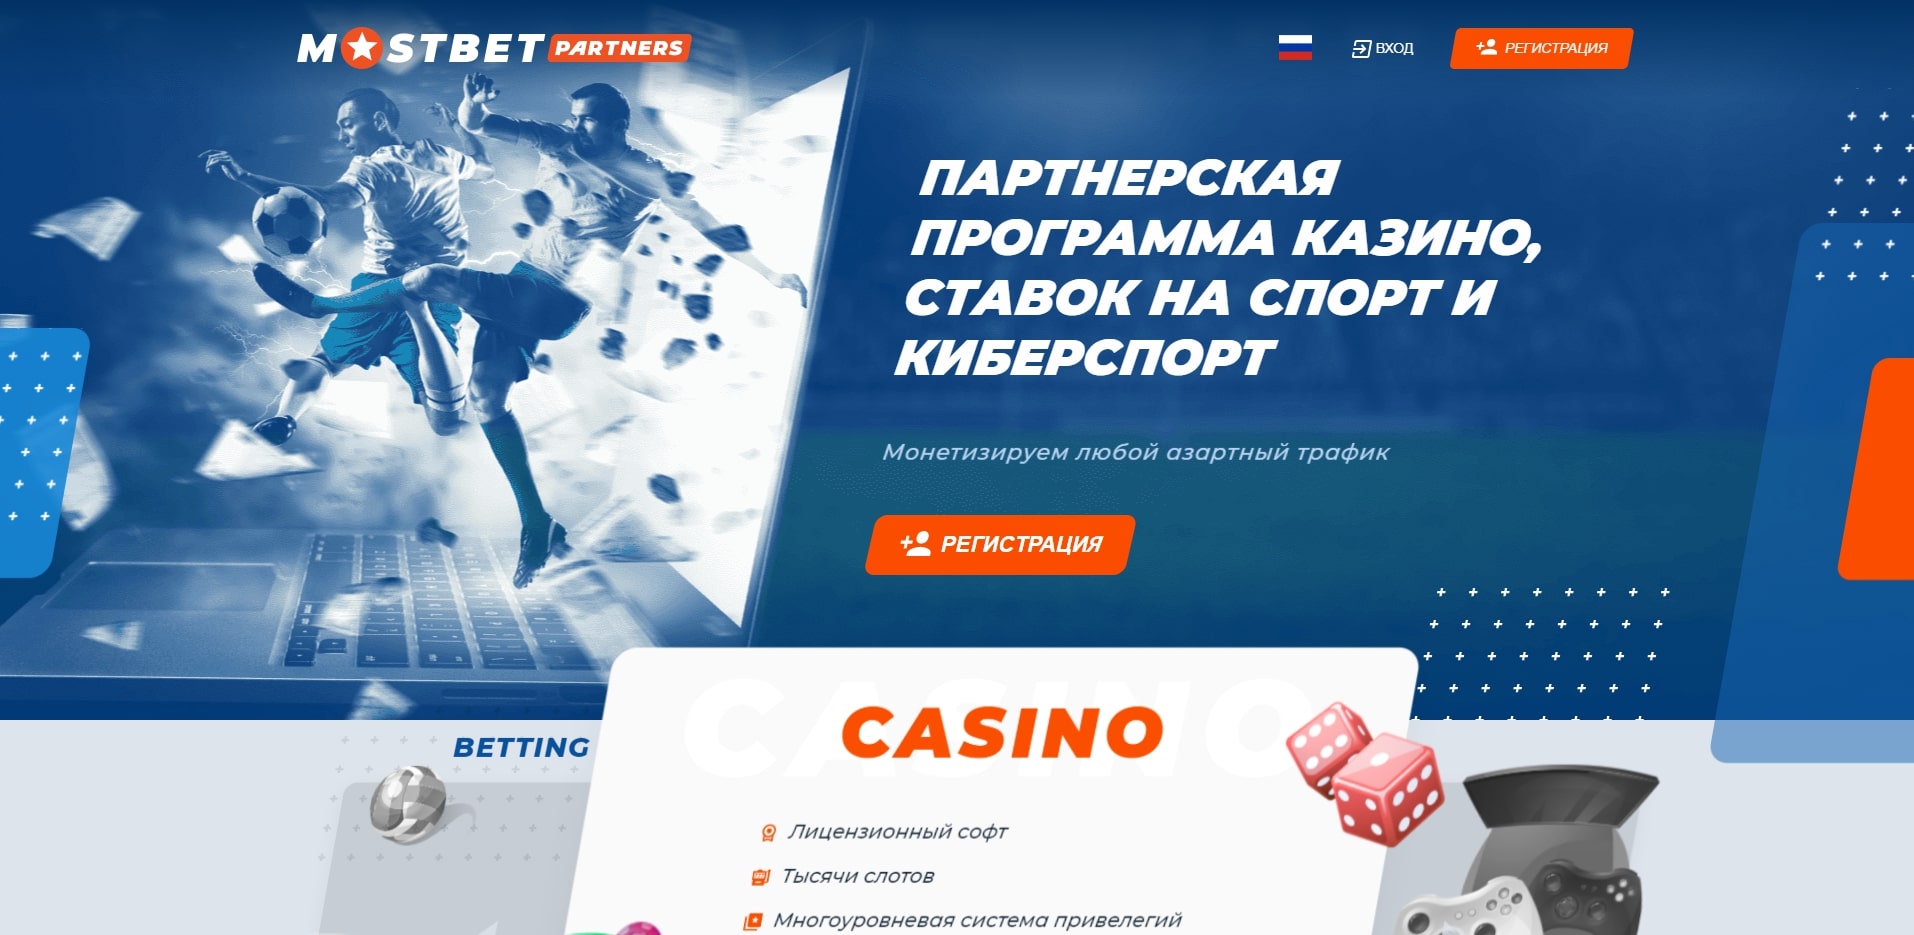 How To Find The Time To Mostbet UZ Get a signup bonus and more On Google